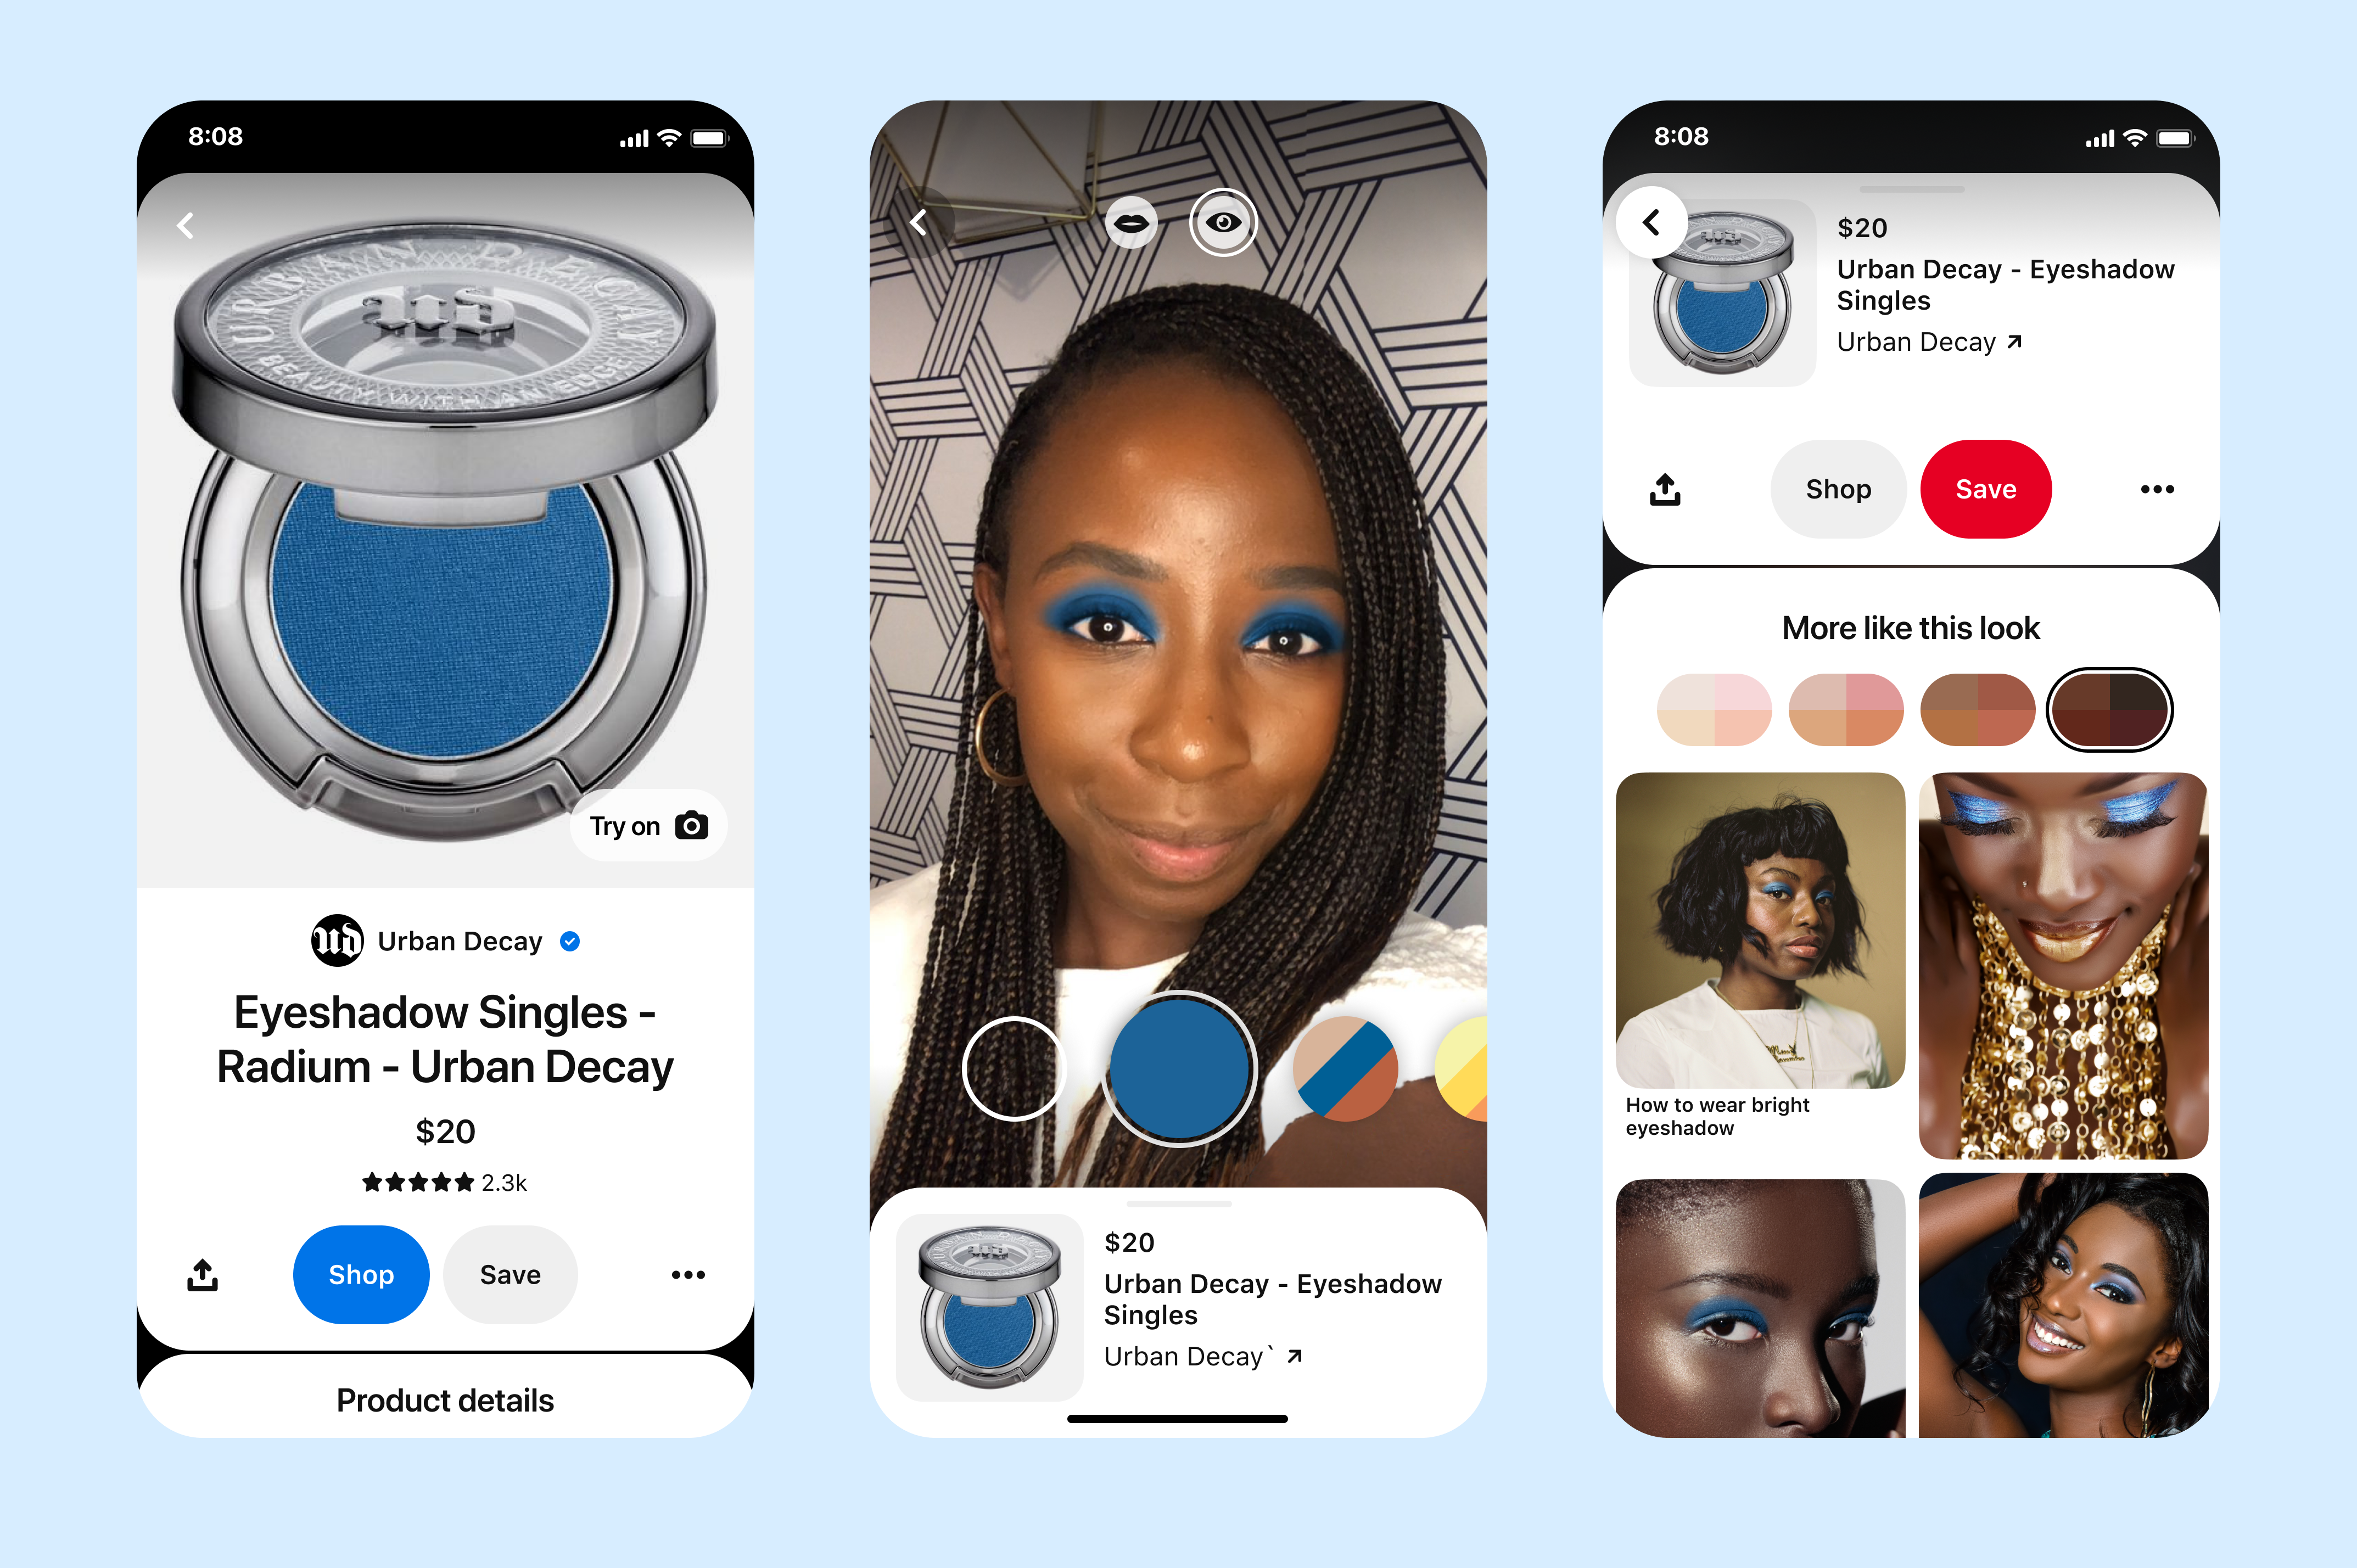 Pinterest Adds Eye Shadows to Its Virtual Try On Feature, and We Tried It